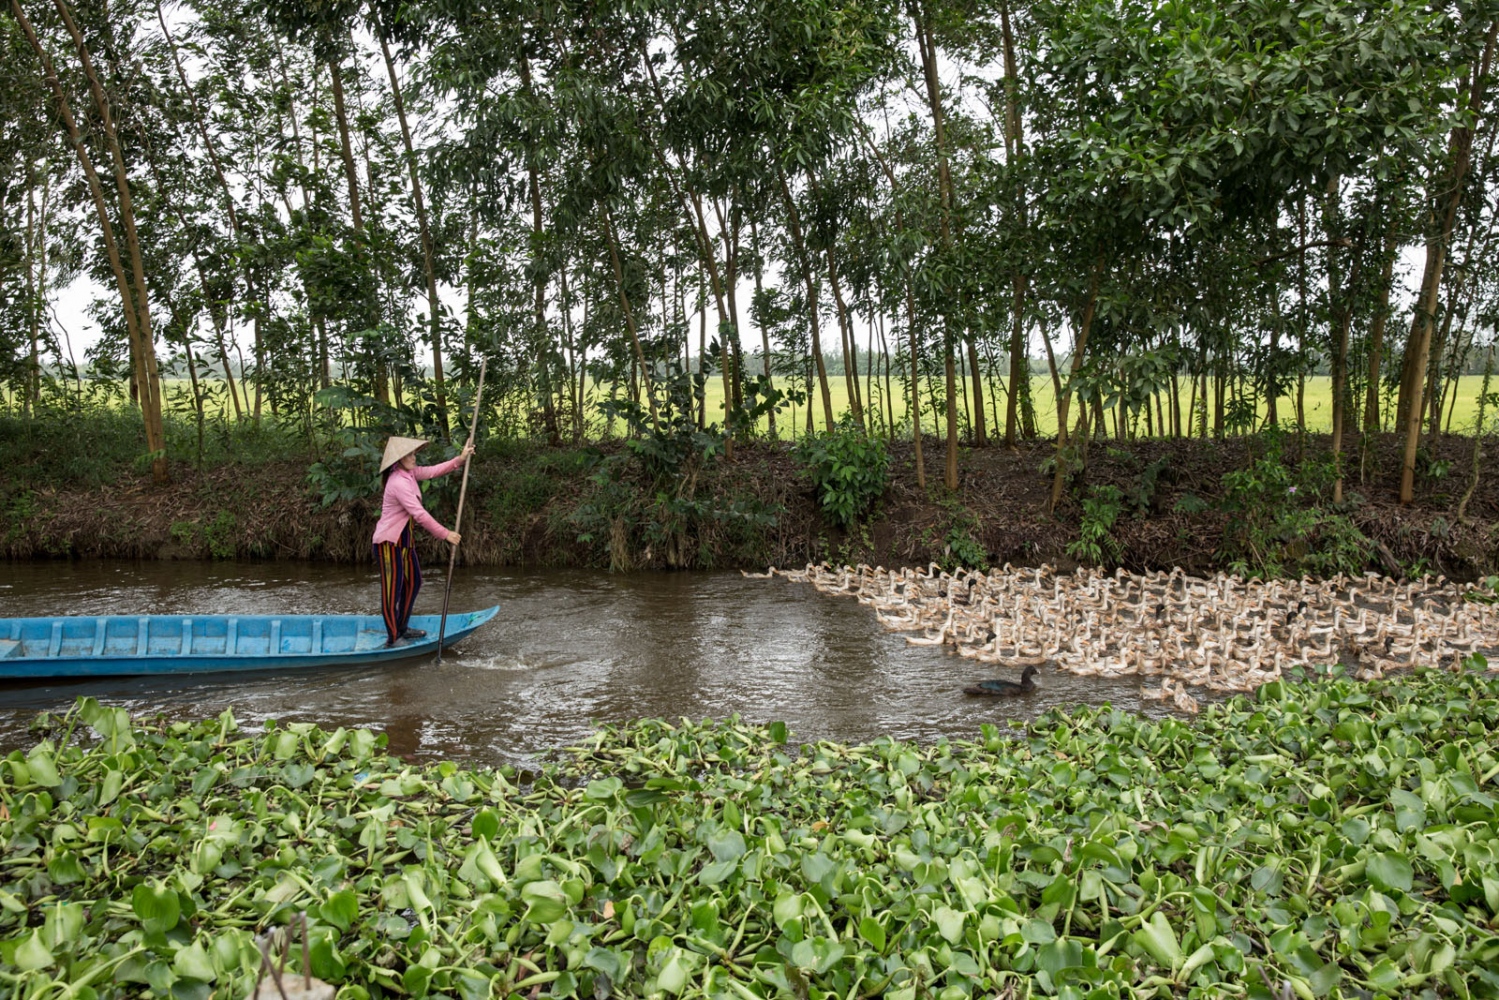  A farmer called Ho The Kieu rounds up her ducks to return them to their pen further down the...